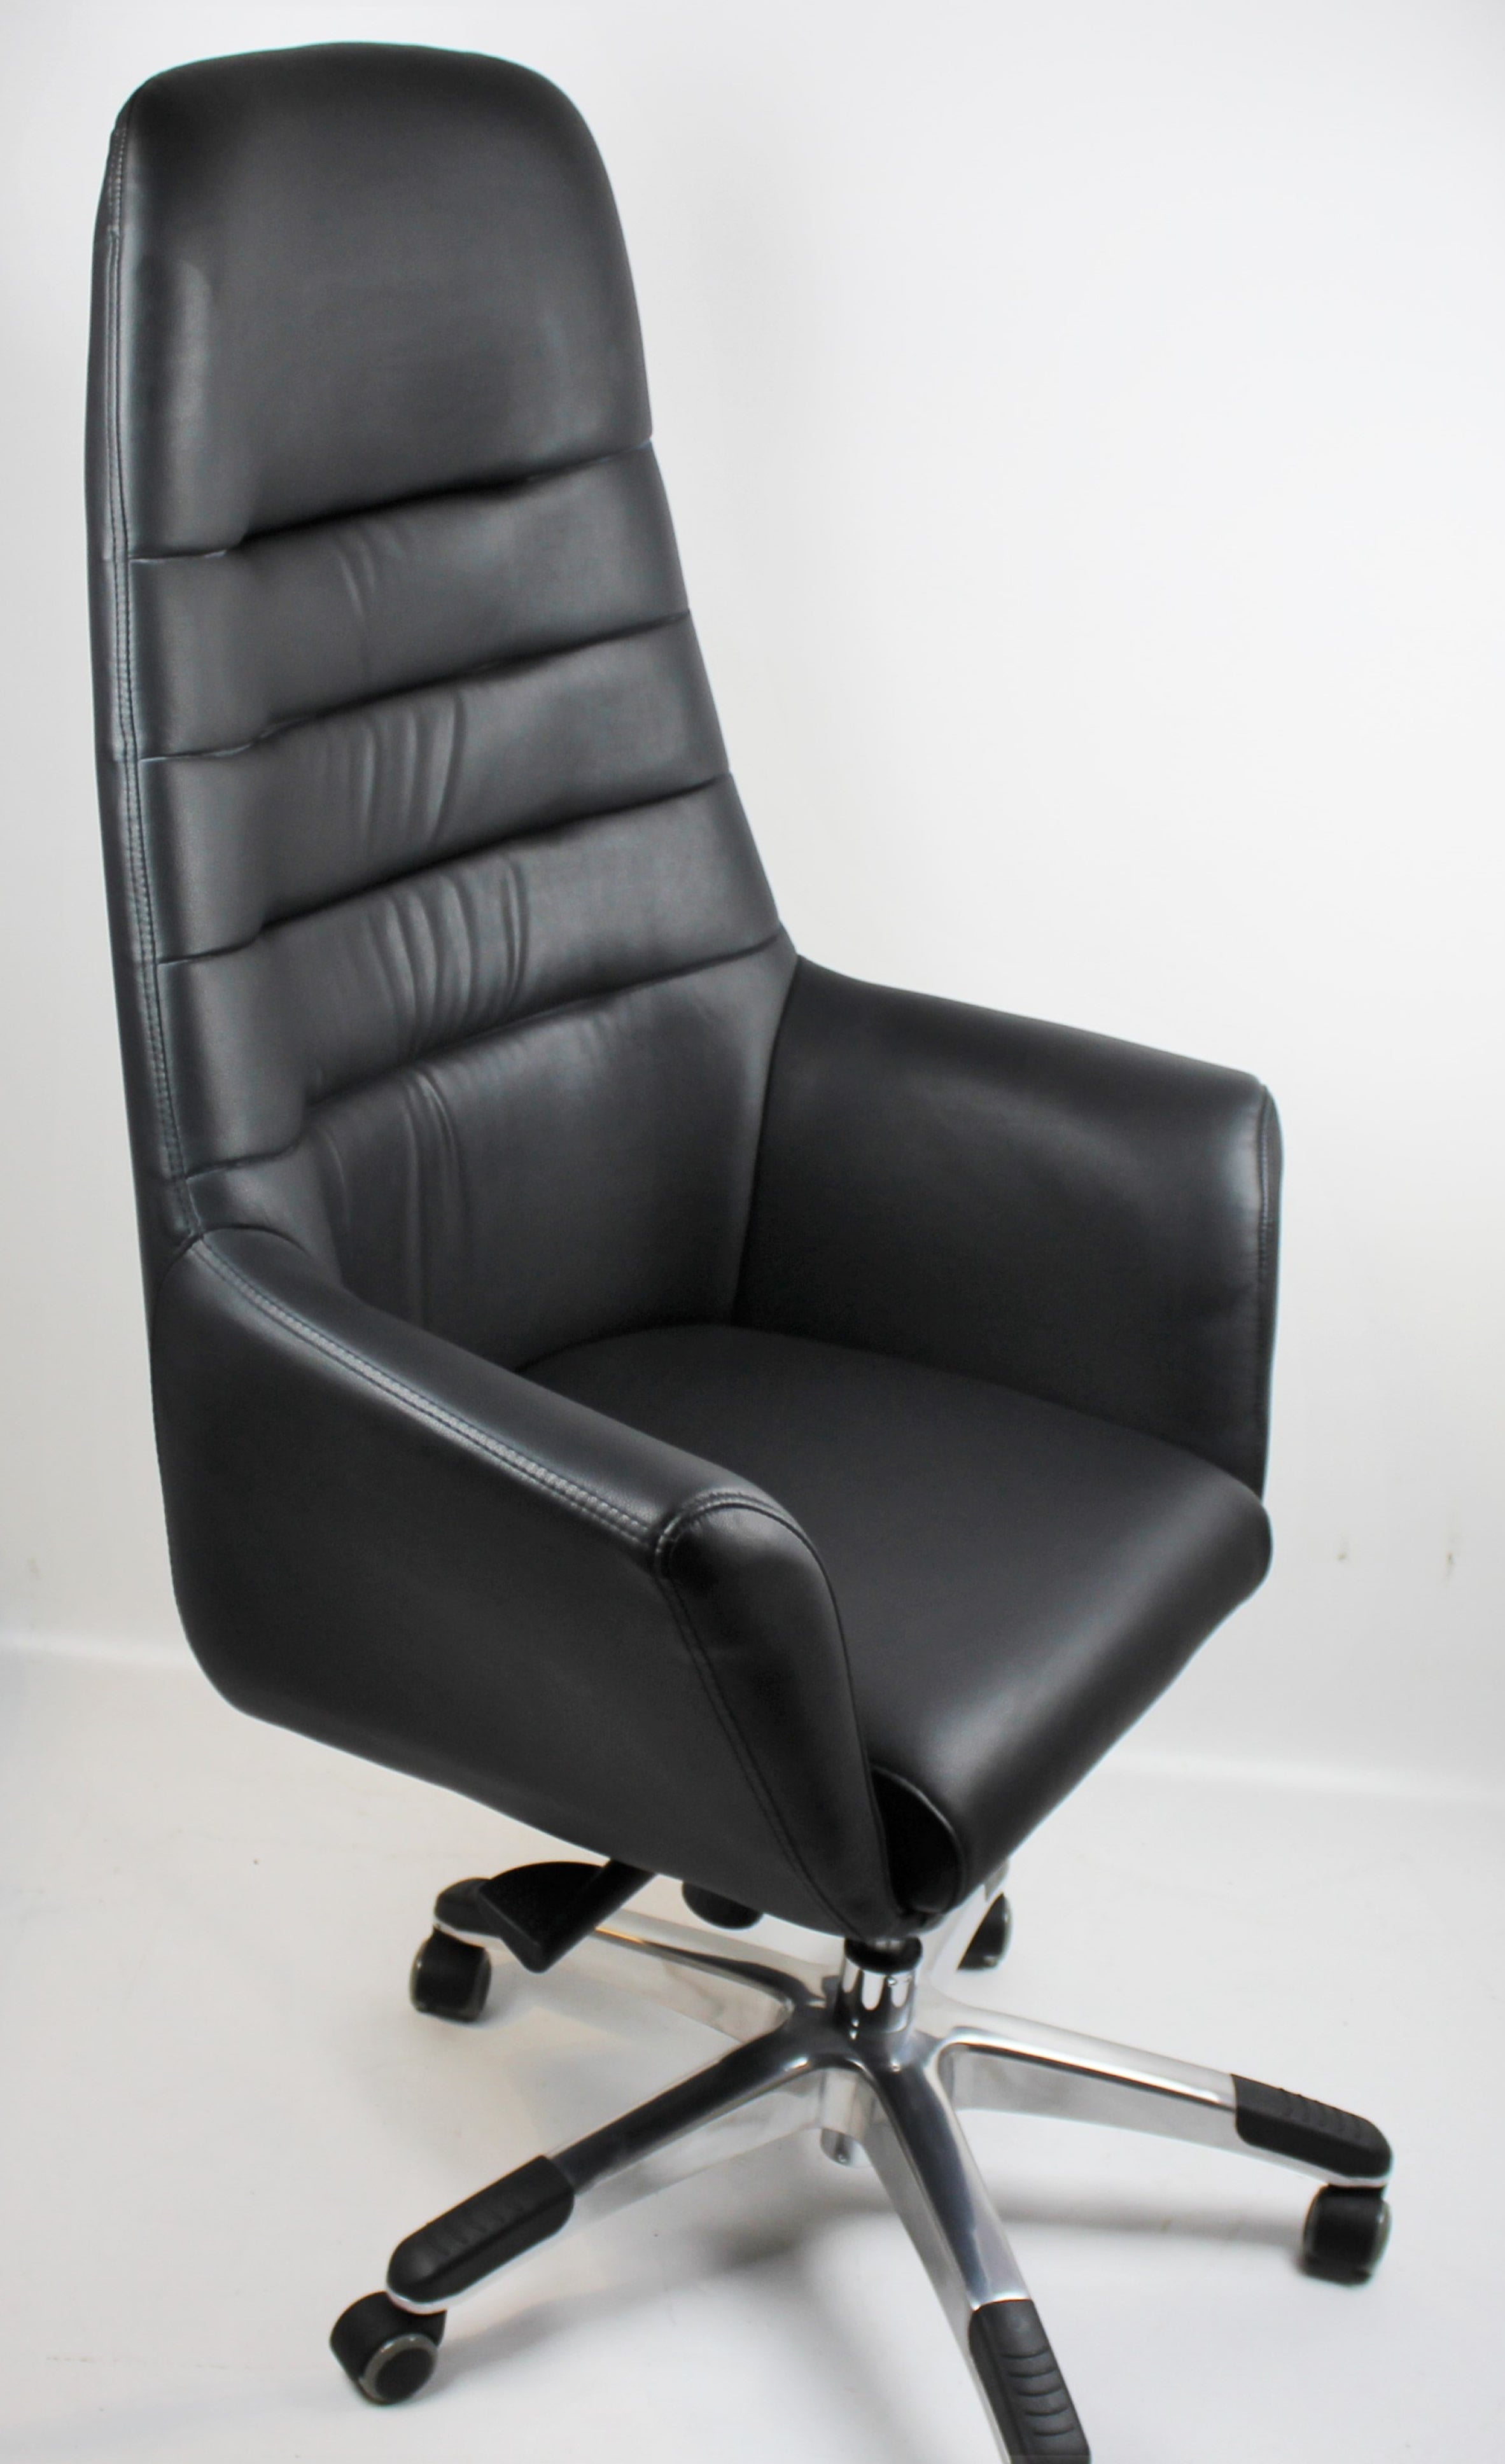 Office Chair In Black With Swivel GRA-CHA-506A-BLK UK